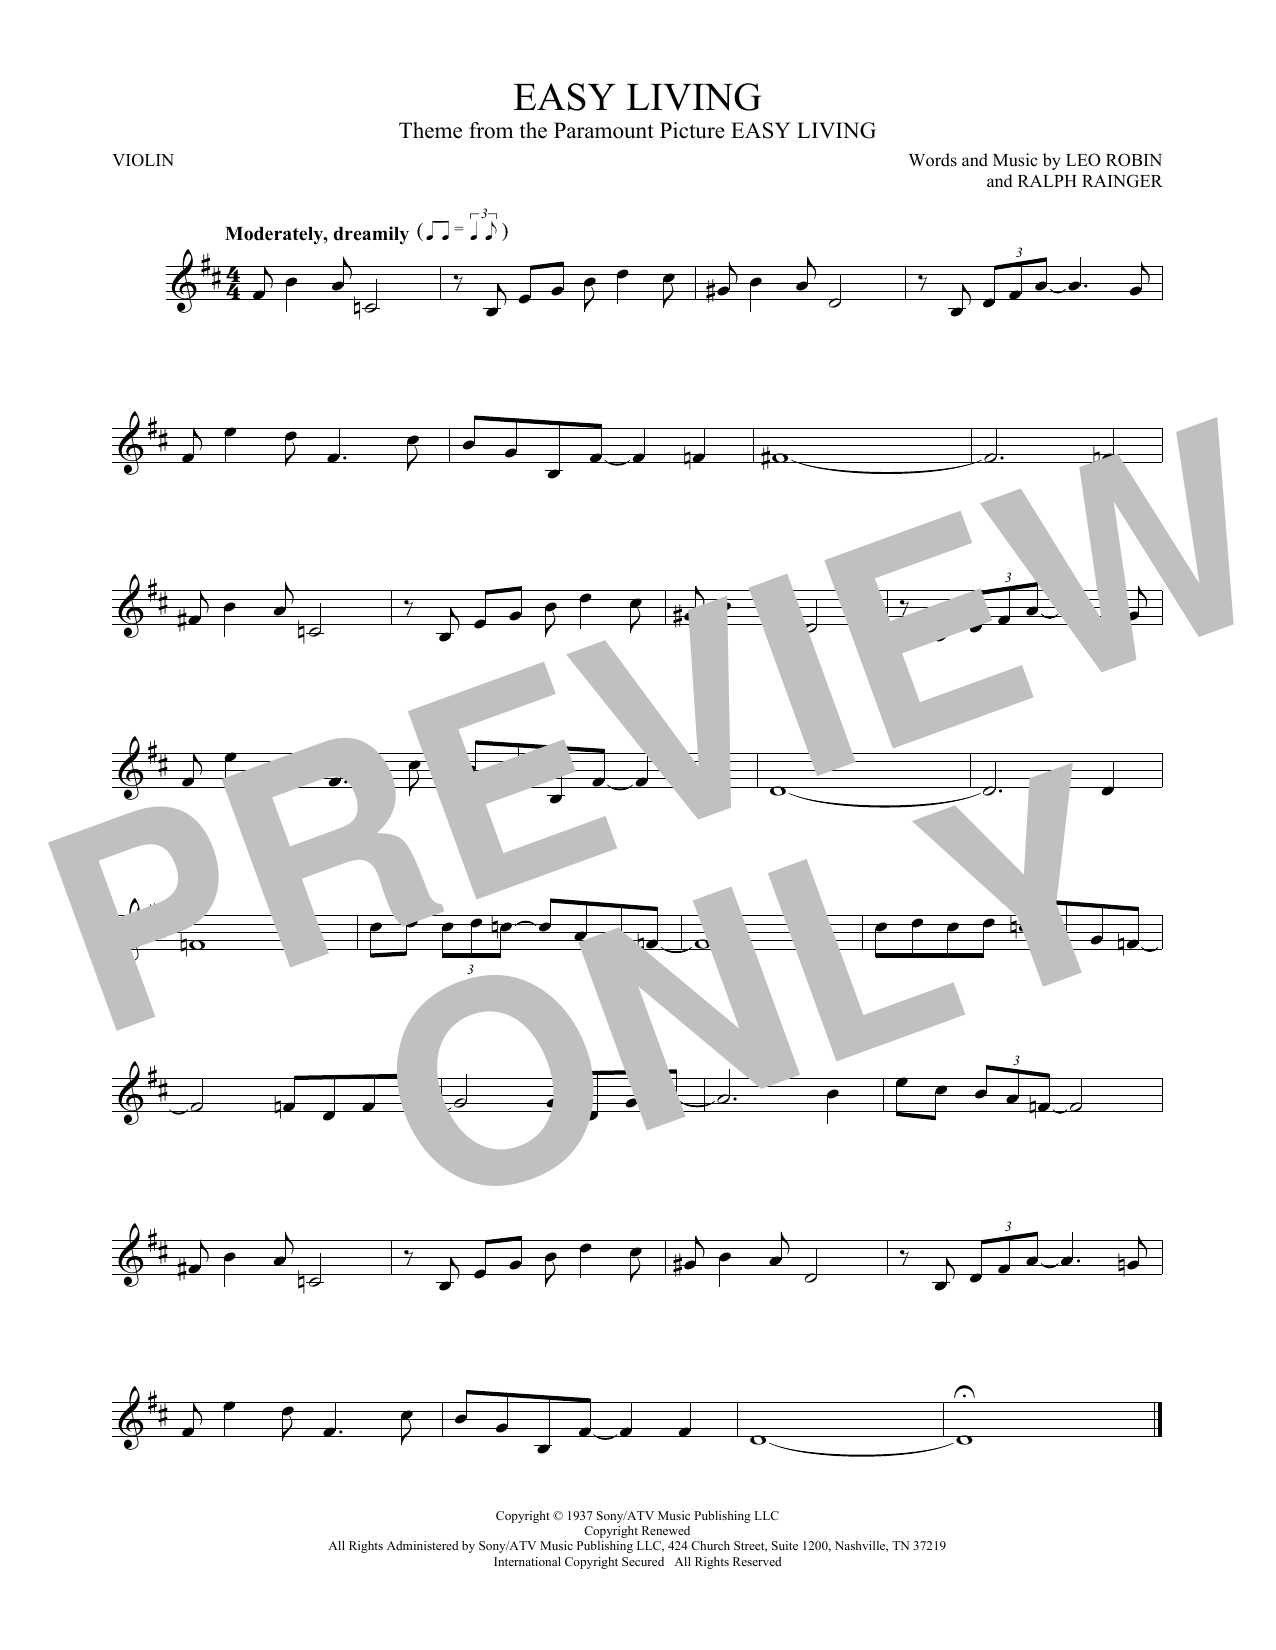 Download Billie Holiday Easy Living Sheet Music